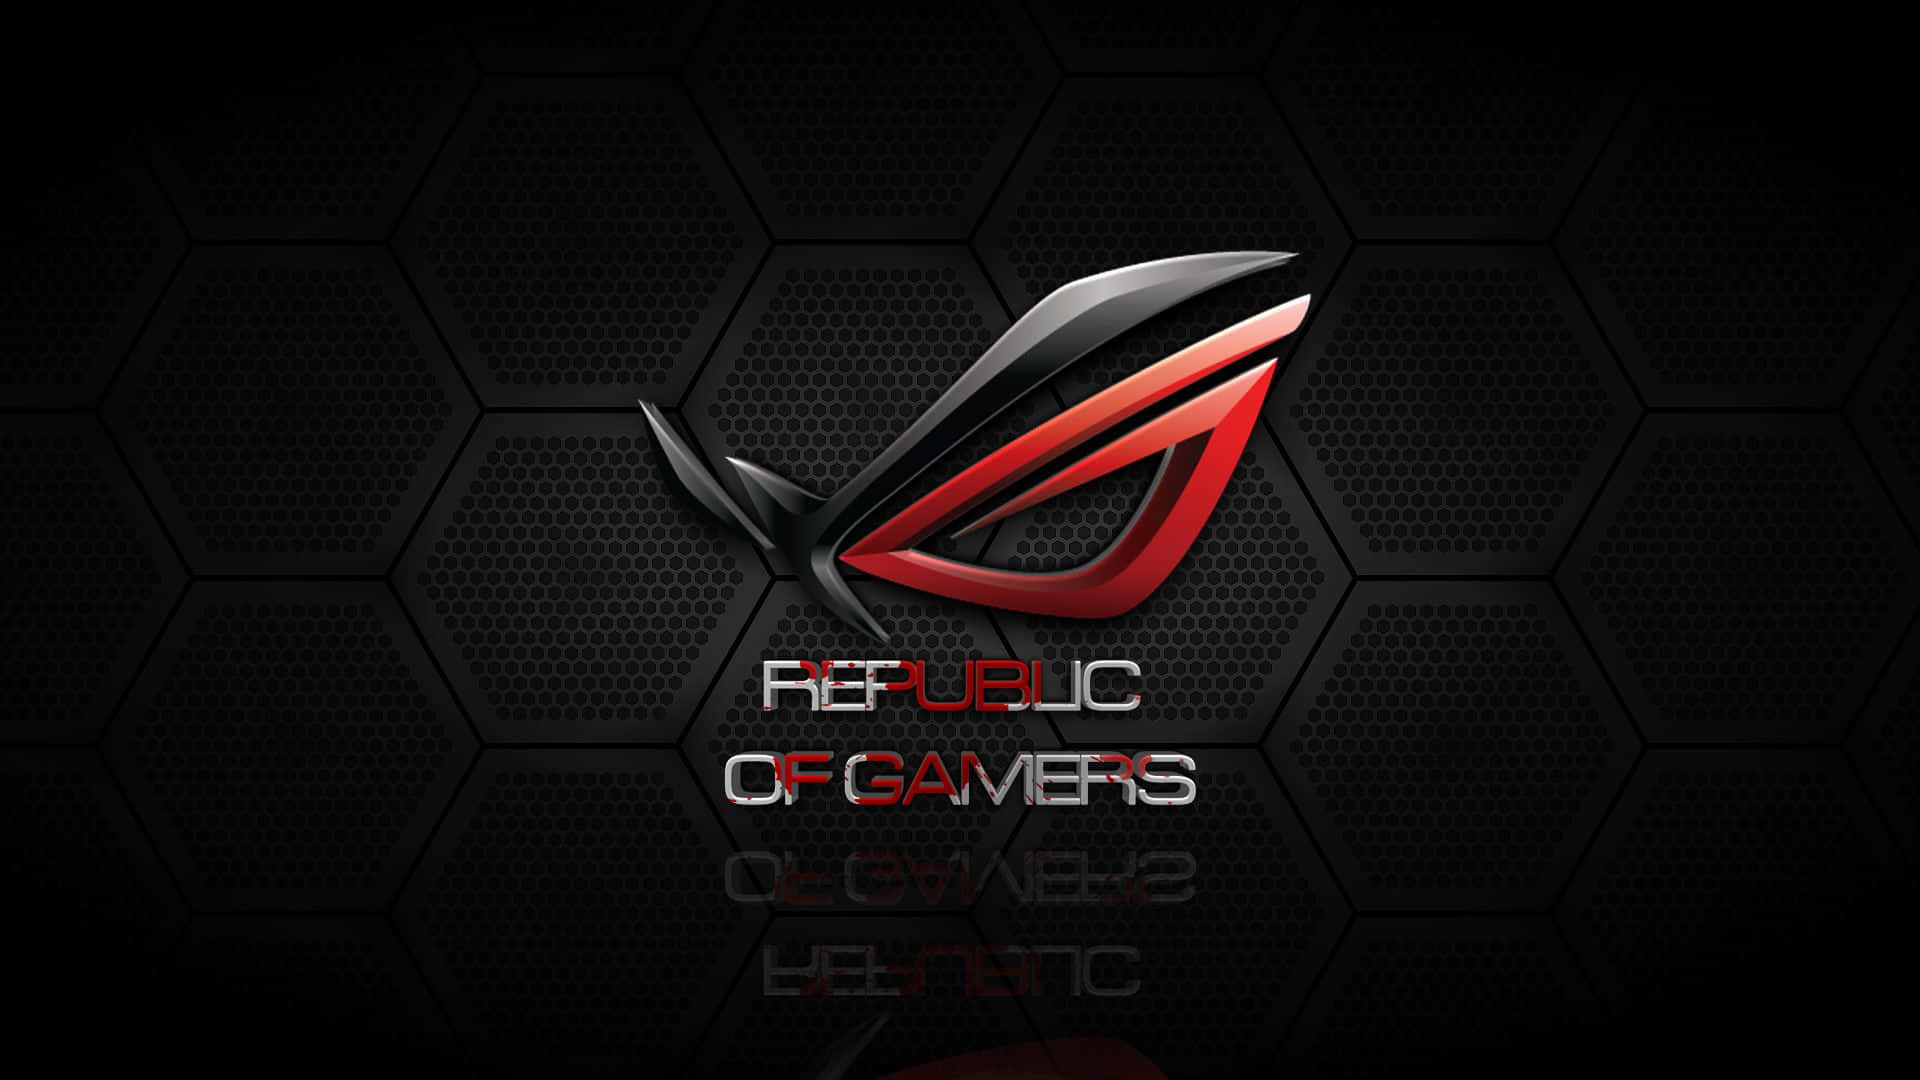 Pro-level gaming with Asus Rog